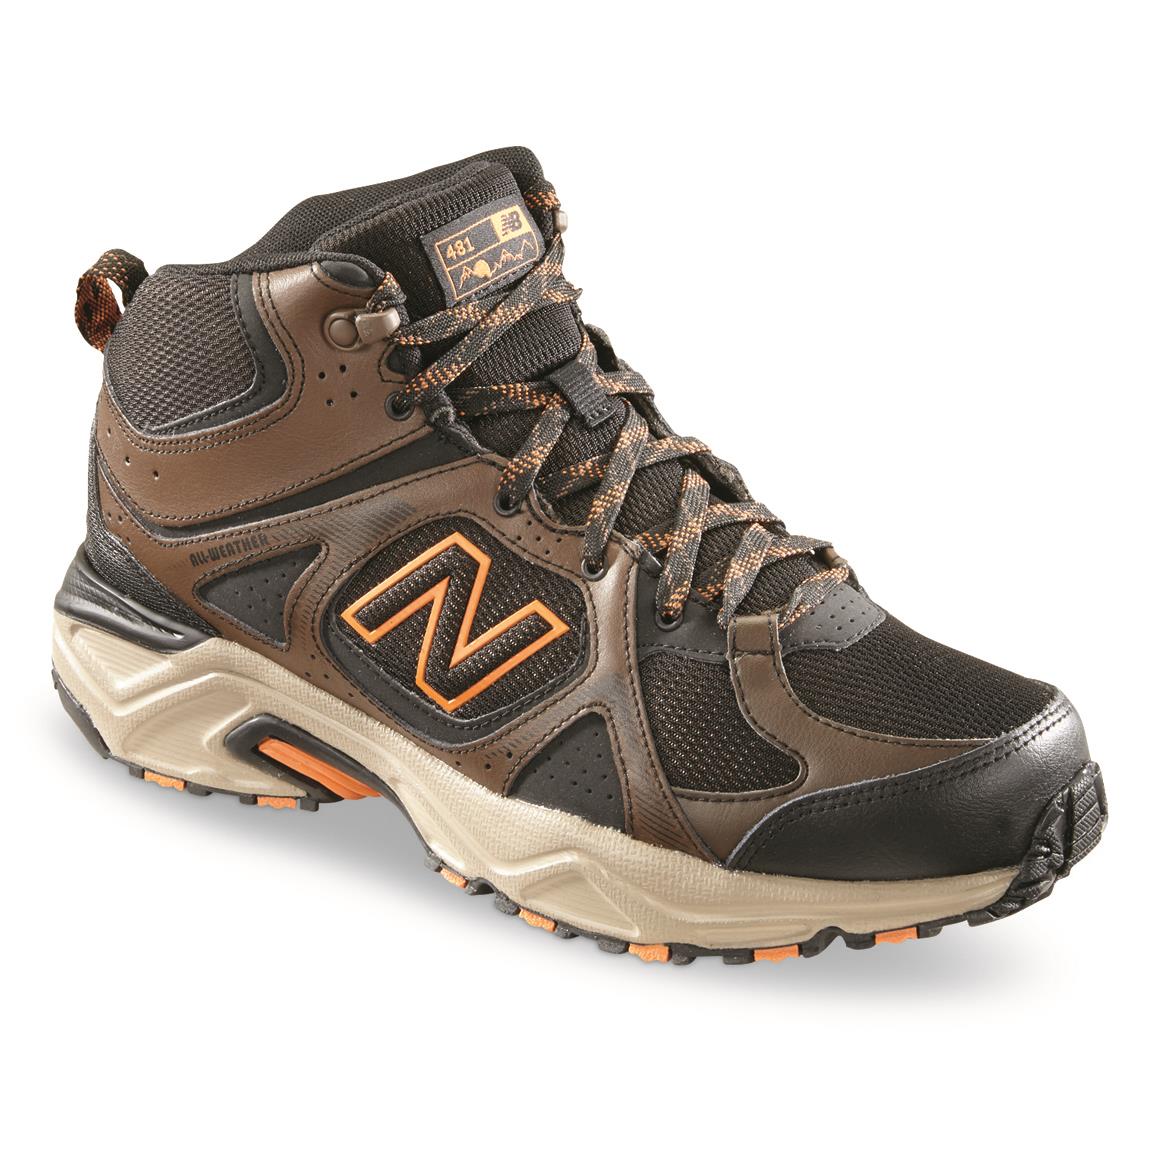 481v3 Mid Water Resistant Trail Shoes 